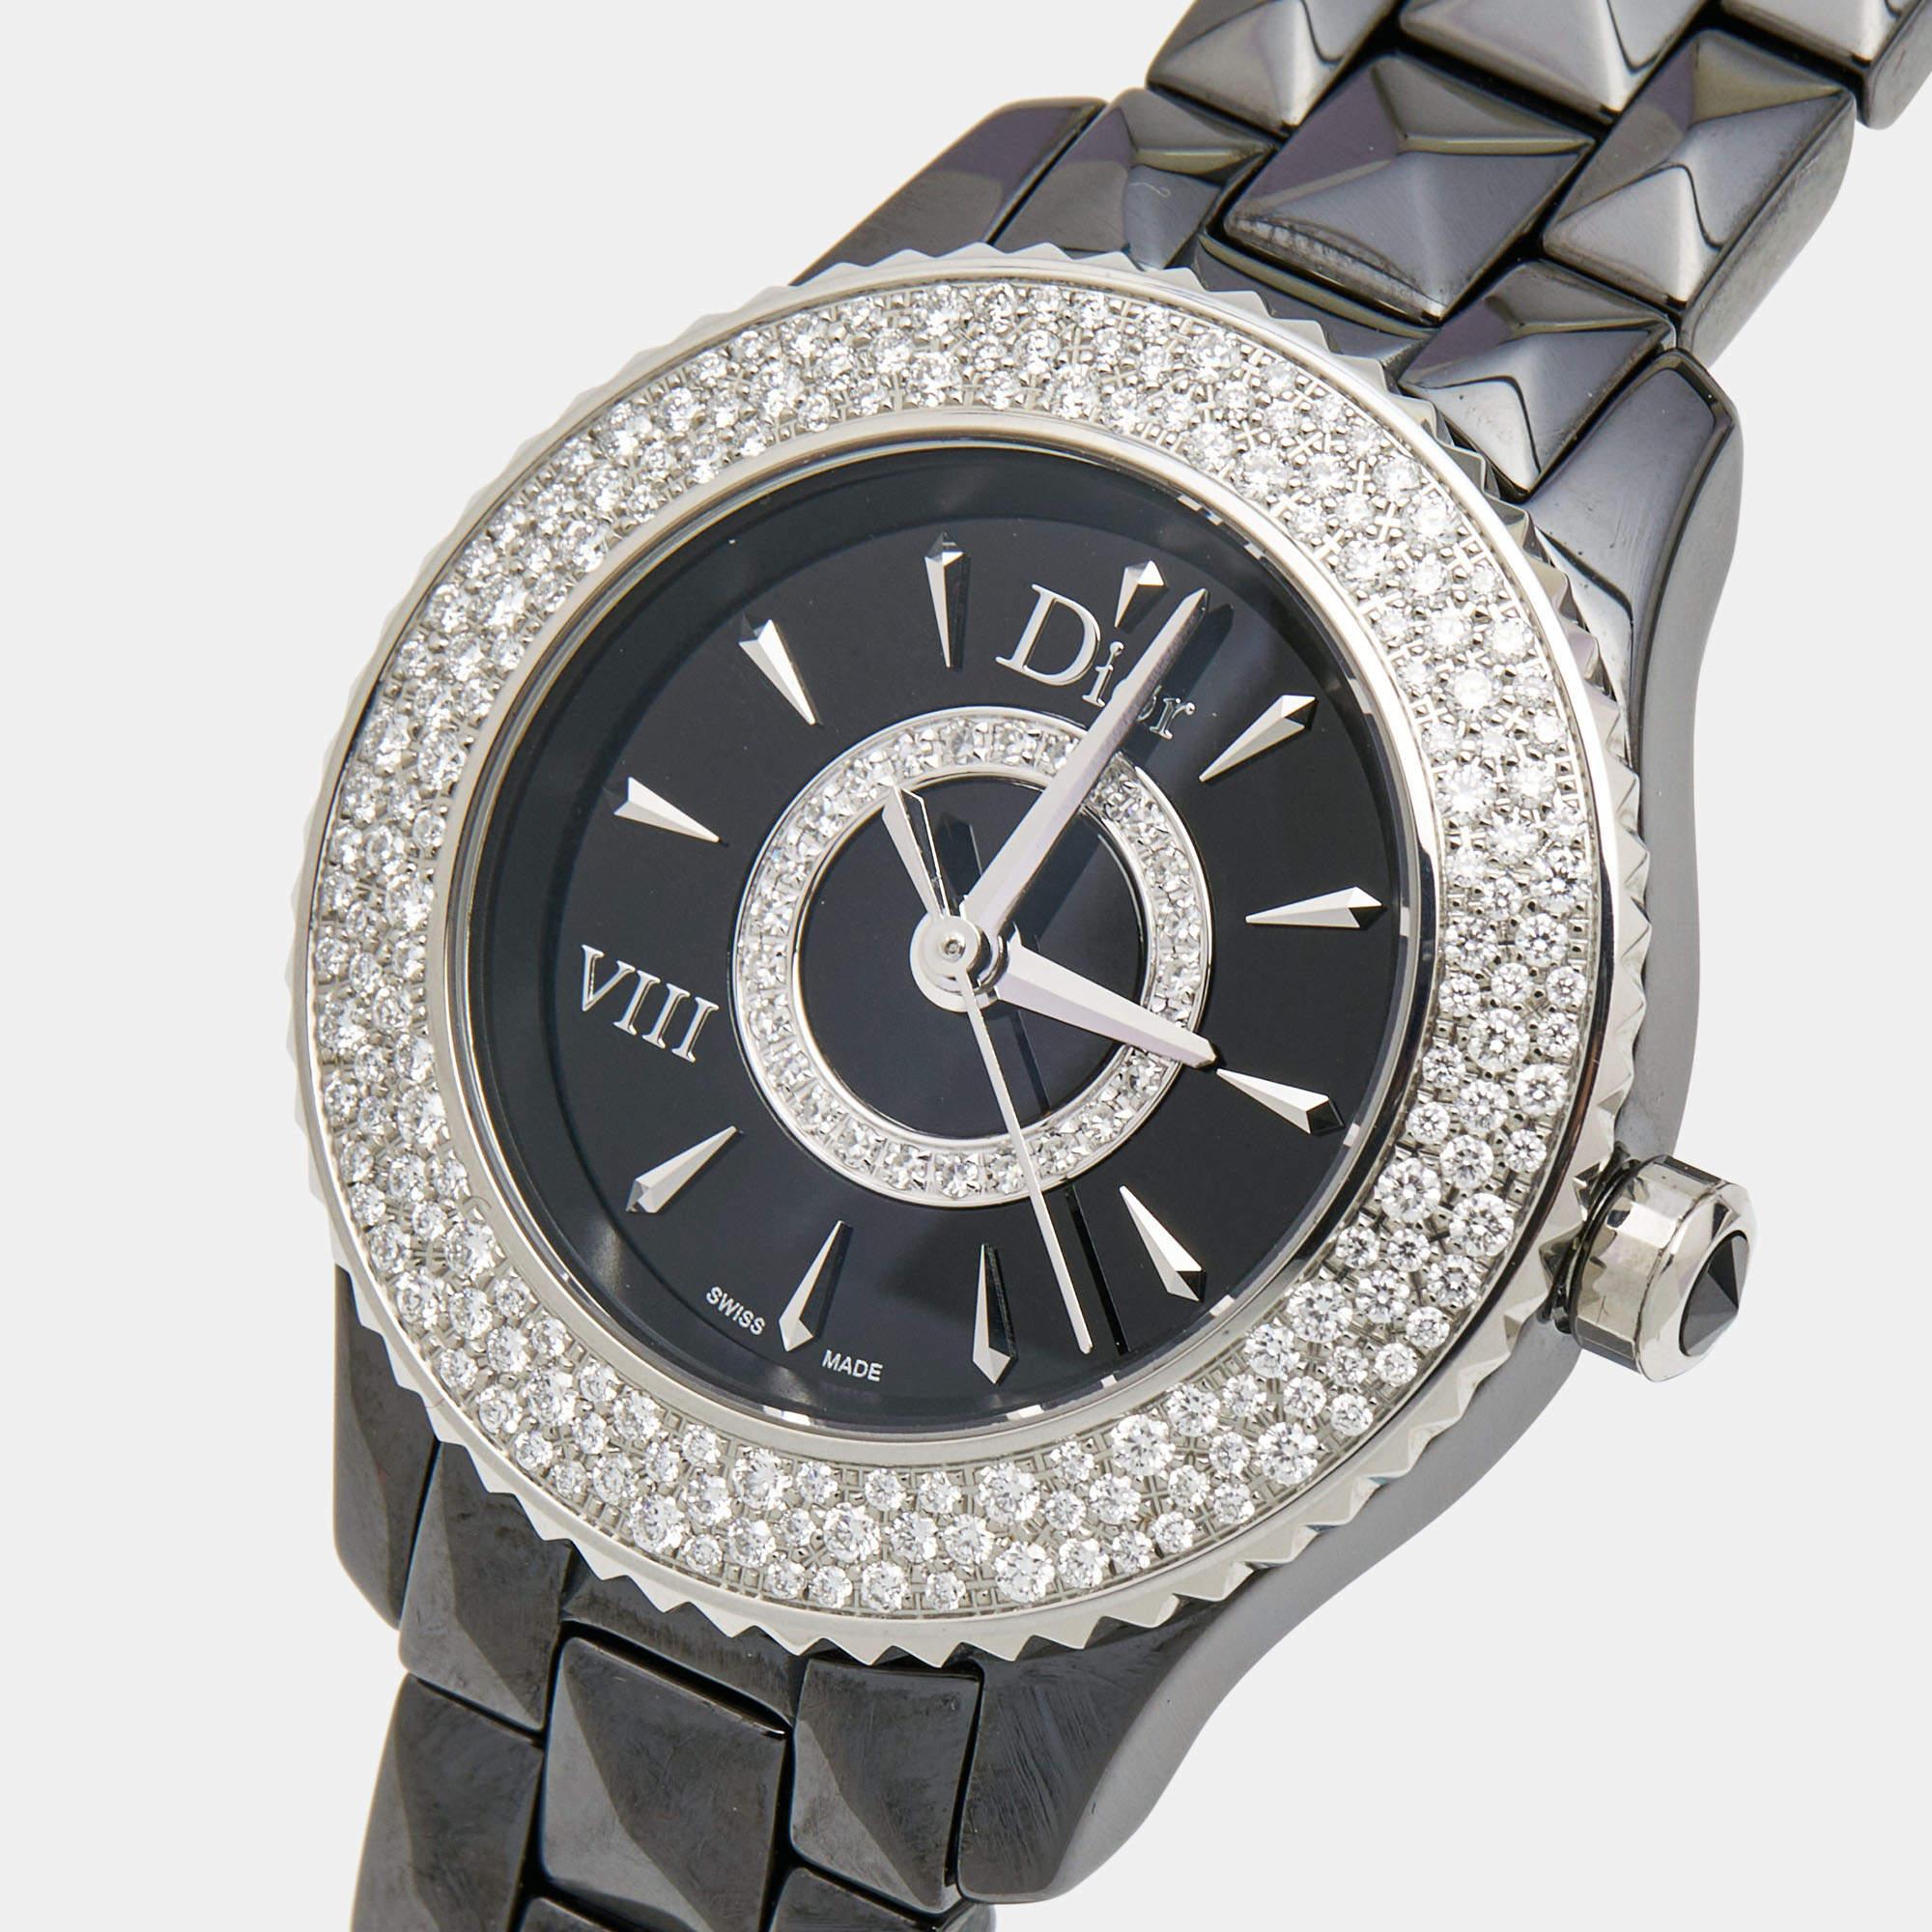 The Dior VIII CD1221E5C001 wristwatch is an exquisite timepiece measuring 28mm in diameter. It boasts a striking fusion of black ceramic and stainless steel, combining durability with elegance. The watch features Dior's signature design elements,